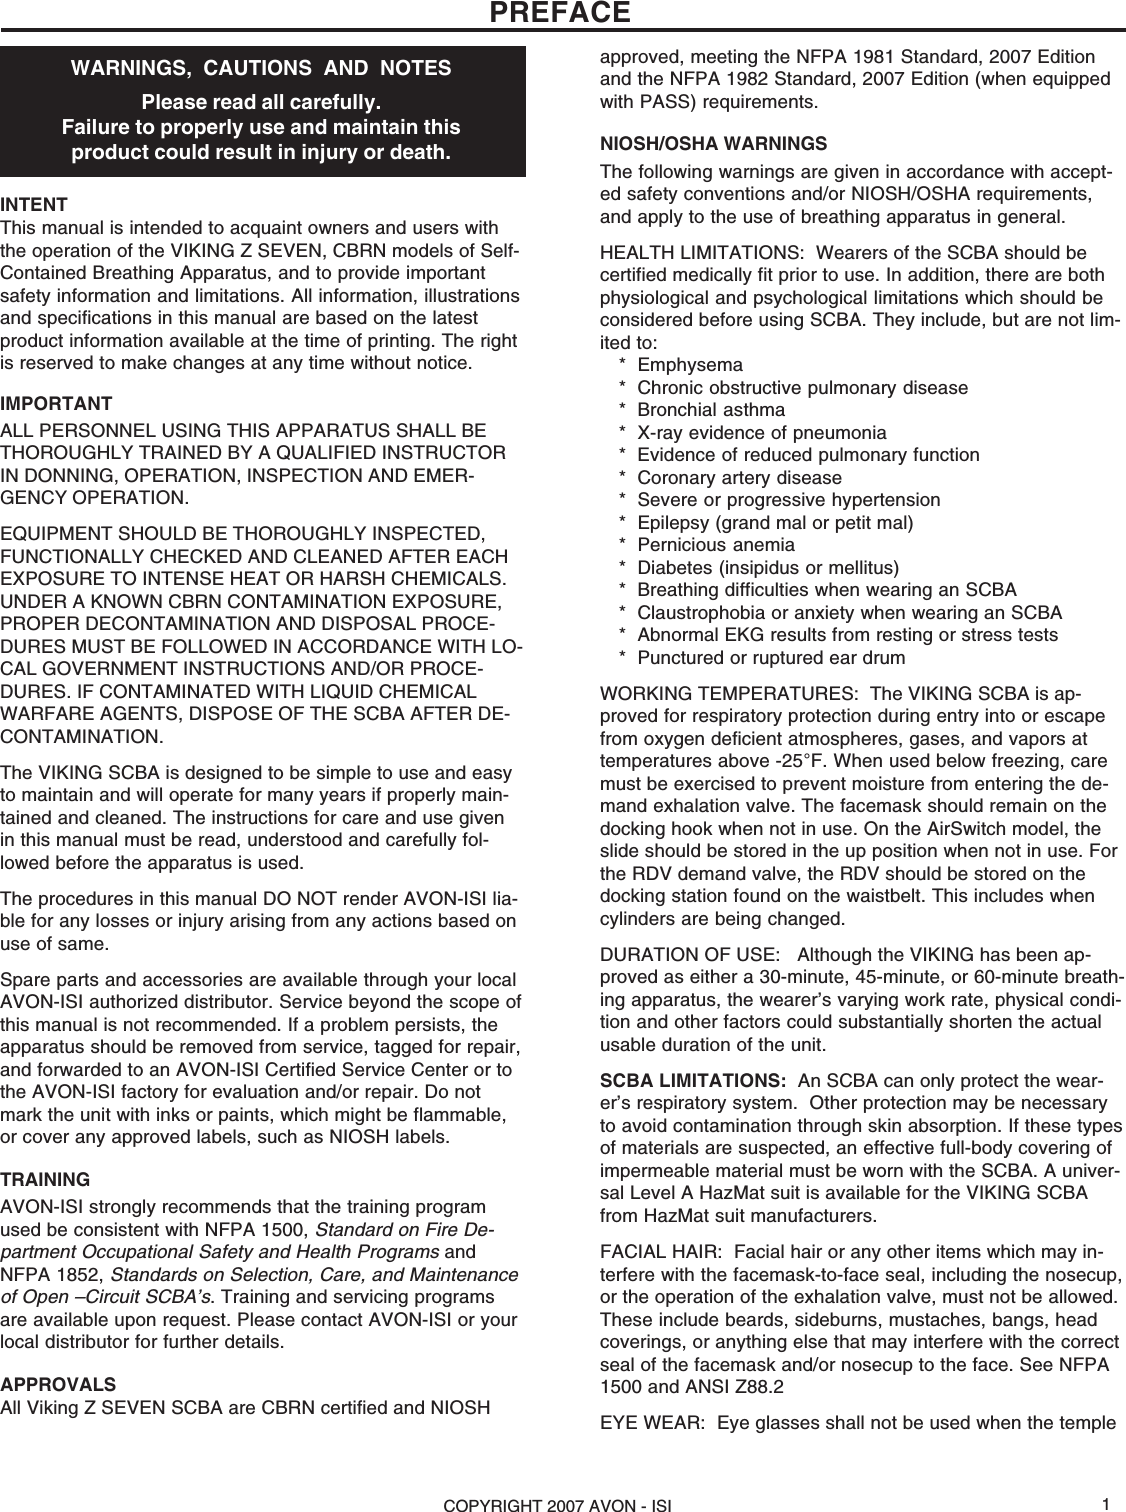 COPYRIGHT 2007 AVON - ISI 1PREFACEWARNINGS,  CAUTIONS  AND  NOTESPlease read all carefully.Failure to properly use and maintain thisproduct could result in injury or death.INTENTThis manual is intended to acquaint owners and users withthe operation of the VIKING Z SEVEN, CBRN models of Self-Contained Breathing Apparatus, and to provide importantsafety information and limitations. All information, illustrationsand specifications in this manual are based on the latestproduct information available at the time of printing. The rightis reserved to make changes at any time without notice.IMPORTANTALL PERSONNEL USING THIS APPARATUS SHALL BETHOROUGHLY TRAINED BY A QUALIFIED INSTRUCTORIN DONNING, OPERATION, INSPECTION AND EMER-GENCY OPERATION.EQUIPMENT SHOULD BE THOROUGHLY INSPECTED,FUNCTIONALLY CHECKED AND CLEANED AFTER EACHEXPOSURE TO INTENSE HEAT OR HARSH CHEMICALS.UNDER A KNOWN CBRN CONTAMINATION EXPOSURE,PROPER DECONTAMINATION AND DISPOSAL PROCE-DURES MUST BE FOLLOWED IN ACCORDANCE WITH LO-CAL GOVERNMENT INSTRUCTIONS AND/OR PROCE-DURES. IF CONTAMINATED WITH LIQUID CHEMICALWARFARE AGENTS, DISPOSE OF THE SCBA AFTER DE-CONTAMINATION.The VIKING SCBA is designed to be simple to use and easyto maintain and will operate for many years if properly main-tained and cleaned. The instructions for care and use givenin this manual must be read, understood and carefully fol-lowed before the apparatus is used.The procedures in this manual DO NOT render AVON-ISI lia-ble for any losses or injury arising from any actions based onuse of same.Spare parts and accessories are available through your localAVON-ISI authorized distributor. Service beyond the scope ofthis manual is not recommended. If a problem persists, theapparatus should be removed from service, tagged for repair,and forwarded to an AVON-ISI Certified Service Center or tothe AVON-ISI factory for evaluation and/or repair. Do notmark the unit with inks or paints, which might be flammable,or cover any approved labels, such as NIOSH labels.TRAININGAVON-ISI strongly recommends that the training programused be consistent with NFPA 1500, Standard on Fire De-partment Occupational Safety and Health Programs andNFPA 1852, Standards on Selection, Care, and Maintenanceof Open –Circuit SCBA’s. Training and servicing programsare available upon request. Please contact AVON-ISI or yourlocal distributor for further details.APPROVALSAll Viking Z SEVEN SCBA are CBRN certified and NIOSHapproved, meeting the NFPA 1981 Standard, 2007 Editionand the NFPA 1982 Standard, 2007 Edition (when equippedwith PASS) requirements.NIOSH/OSHA WARNINGSThe following warnings are given in accordance with accept-ed safety conventions and/or NIOSH/OSHA requirements,and apply to the use of breathing apparatus in general.HEALTH LIMITATIONS:  Wearers of the SCBA should becertified medically fit prior to use. In addition, there are bothphysiological and psychological limitations which should beconsidered before using SCBA. They include, but are not lim-ited to:* Emphysema* Chronic obstructive pulmonary disease* Bronchial asthma* X-ray evidence of pneumonia* Evidence of reduced pulmonary function* Coronary artery disease* Severe or progressive hypertension* Epilepsy (grand mal or petit mal)* Pernicious anemia* Diabetes (insipidus or mellitus)* Breathing difficulties when wearing an SCBA* Claustrophobia or anxiety when wearing an SCBA* Abnormal EKG results from resting or stress tests* Punctured or ruptured ear drumWORKING TEMPERATURES:  The VIKING SCBA is ap-proved for respiratory protection during entry into or escapefrom oxygen deficient atmospheres, gases, and vapors attemperatures above -25°F. When used below freezing, caremust be exercised to prevent moisture from entering the de-mand exhalation valve. The facemask should remain on thedocking hook when not in use. On the AirSwitch model, theslide should be stored in the up position when not in use. Forthe RDV demand valve, the RDV should be stored on thedocking station found on the waistbelt. This includes whencylinders are being changed.DURATION OF USE:   Although the VIKING has been ap-proved as either a 30-minute, 45-minute, or 60-minute breath-ing apparatus, the wearer’s varying work rate, physical condi-tion and other factors could substantially shorten the actualusable duration of the unit.SCBA LIMITATIONS:  An SCBA can only protect the wear-er’s respiratory system.  Other protection may be necessaryto avoid contamination through skin absorption. If these typesof materials are suspected, an effective full-body covering ofimpermeable material must be worn with the SCBA. A univer-sal Level A HazMat suit is available for the VIKING SCBAfrom HazMat suit manufacturers.FACIAL HAIR:  Facial hair or any other items which may in-terfere with the facemask-to-face seal, including the nosecup,or the operation of the exhalation valve, must not be allowed.These include beards, sideburns, mustaches, bangs, headcoverings, or anything else that may interfere with the correctseal of the facemask and/or nosecup to the face. See NFPA1500 and ANSI Z88.2EYE WEAR:  Eye glasses shall not be used when the temple